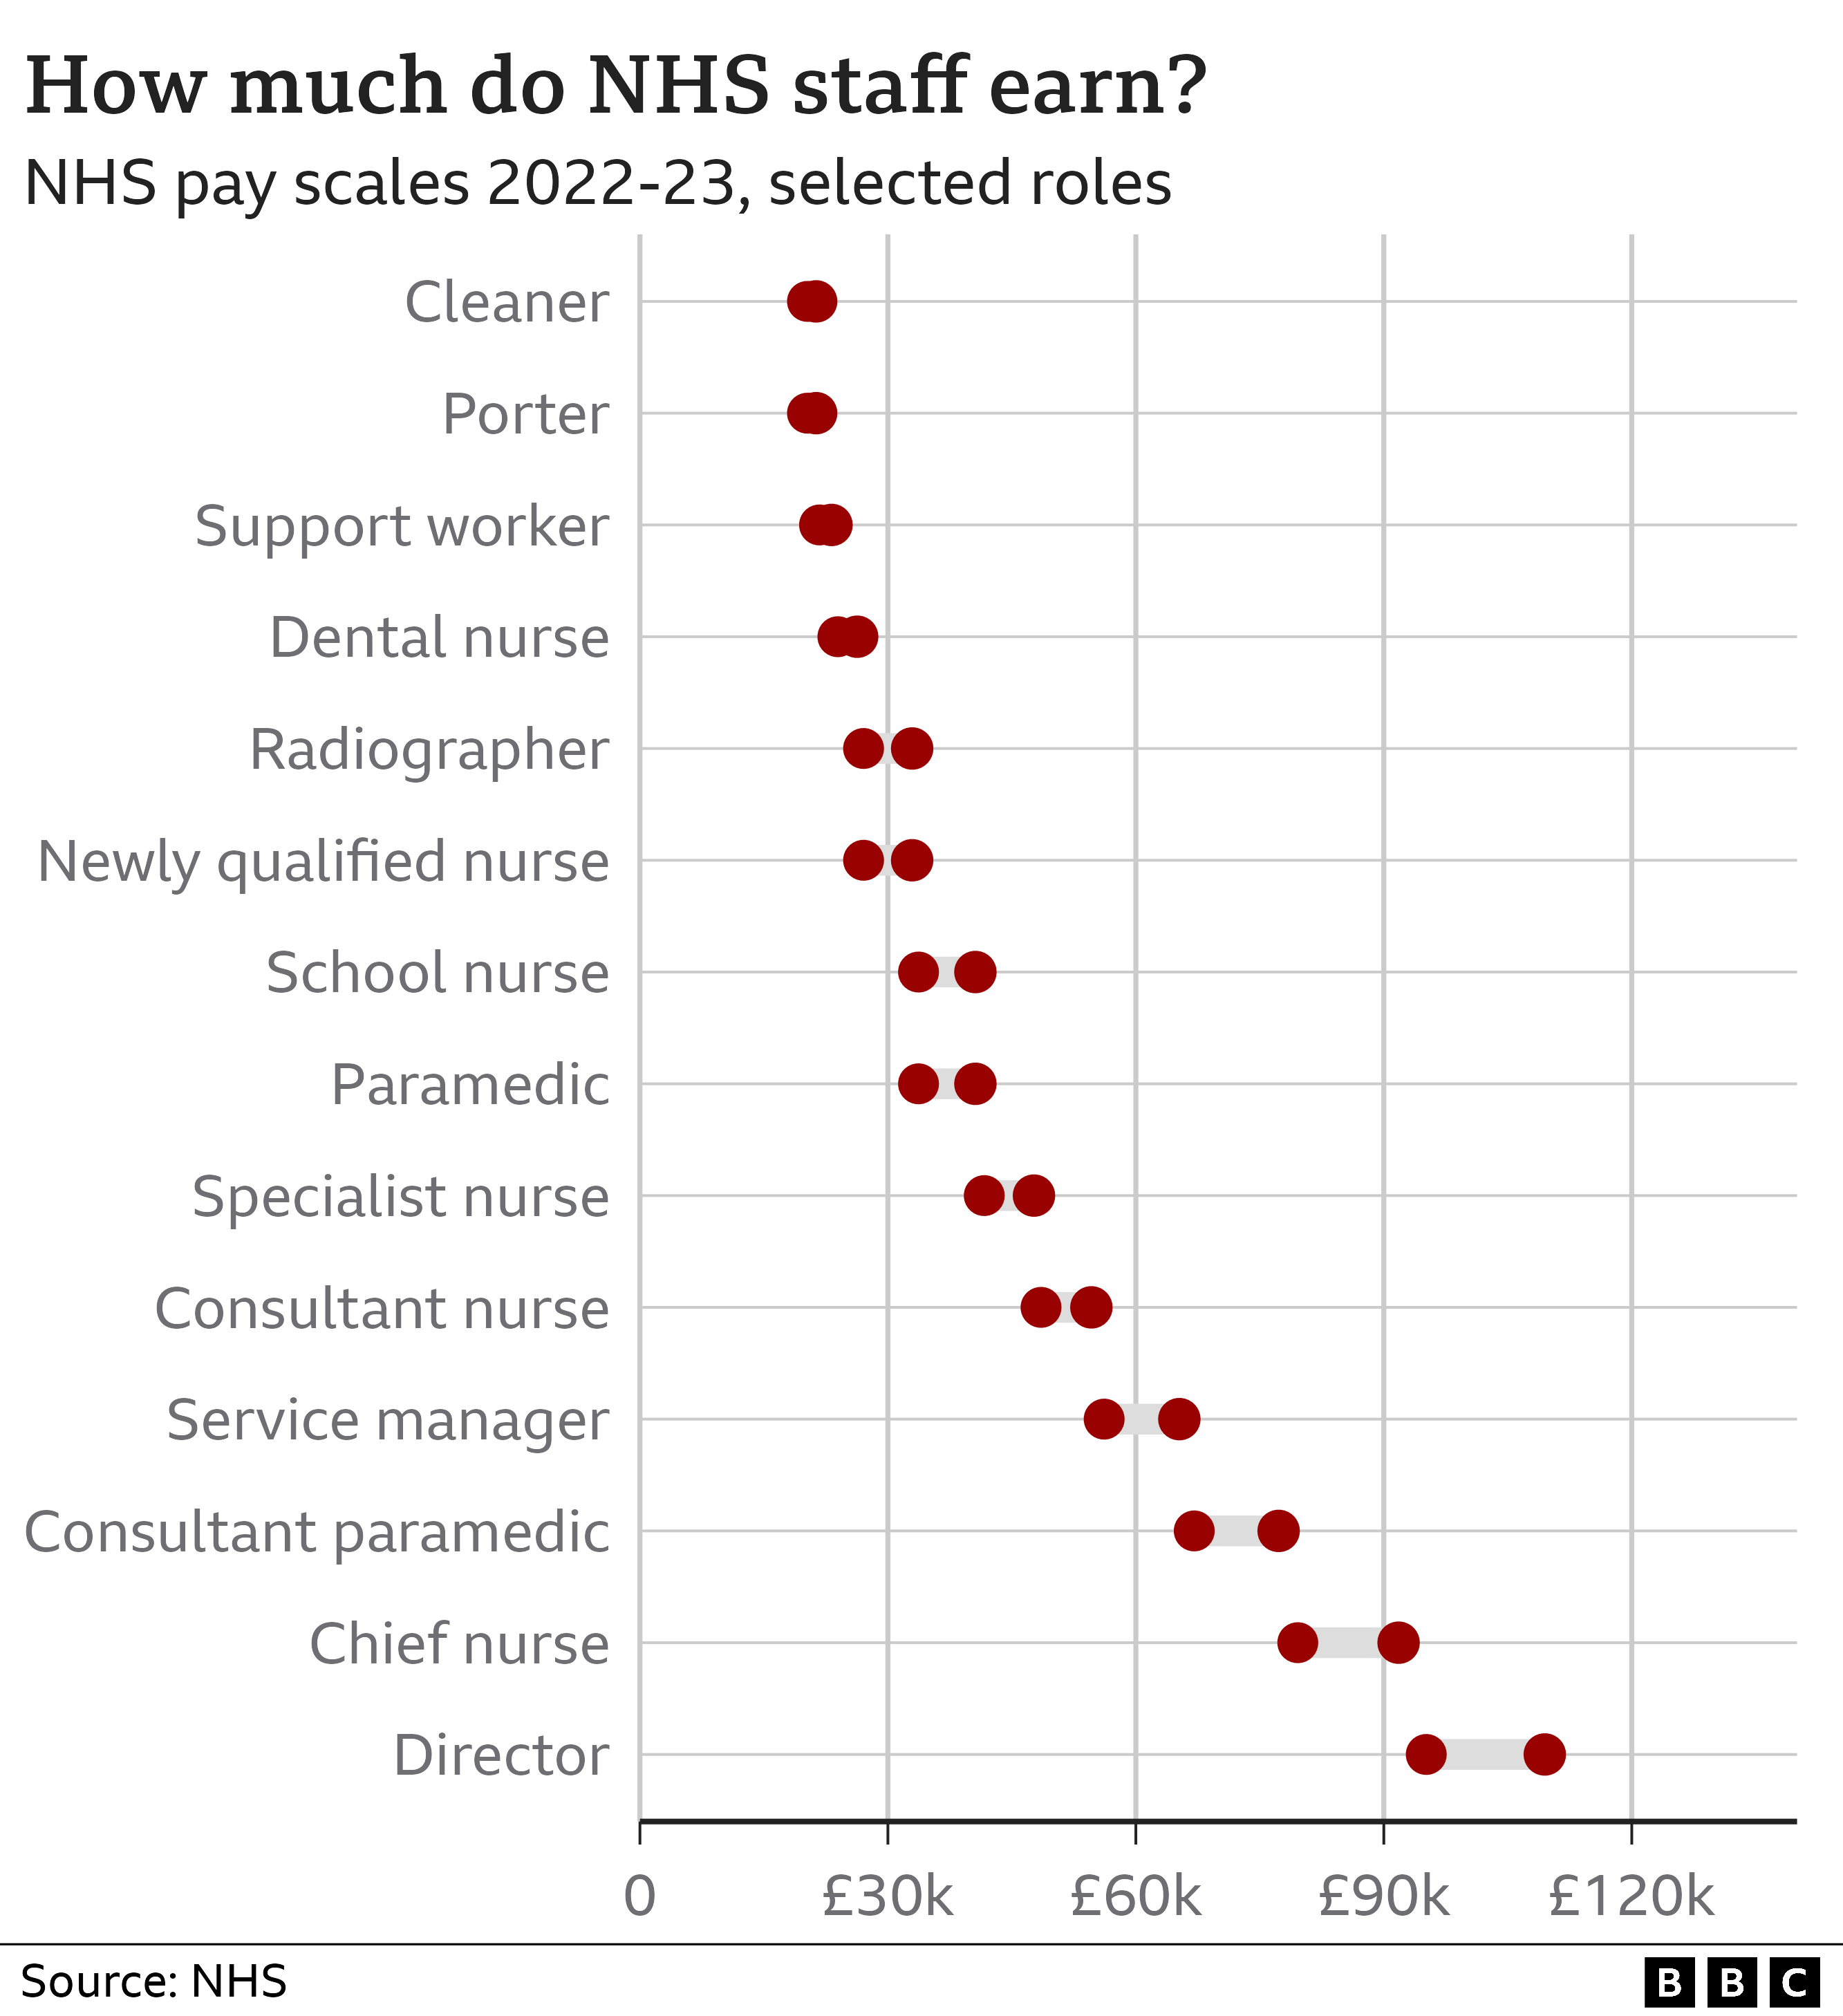 NHS pay scales